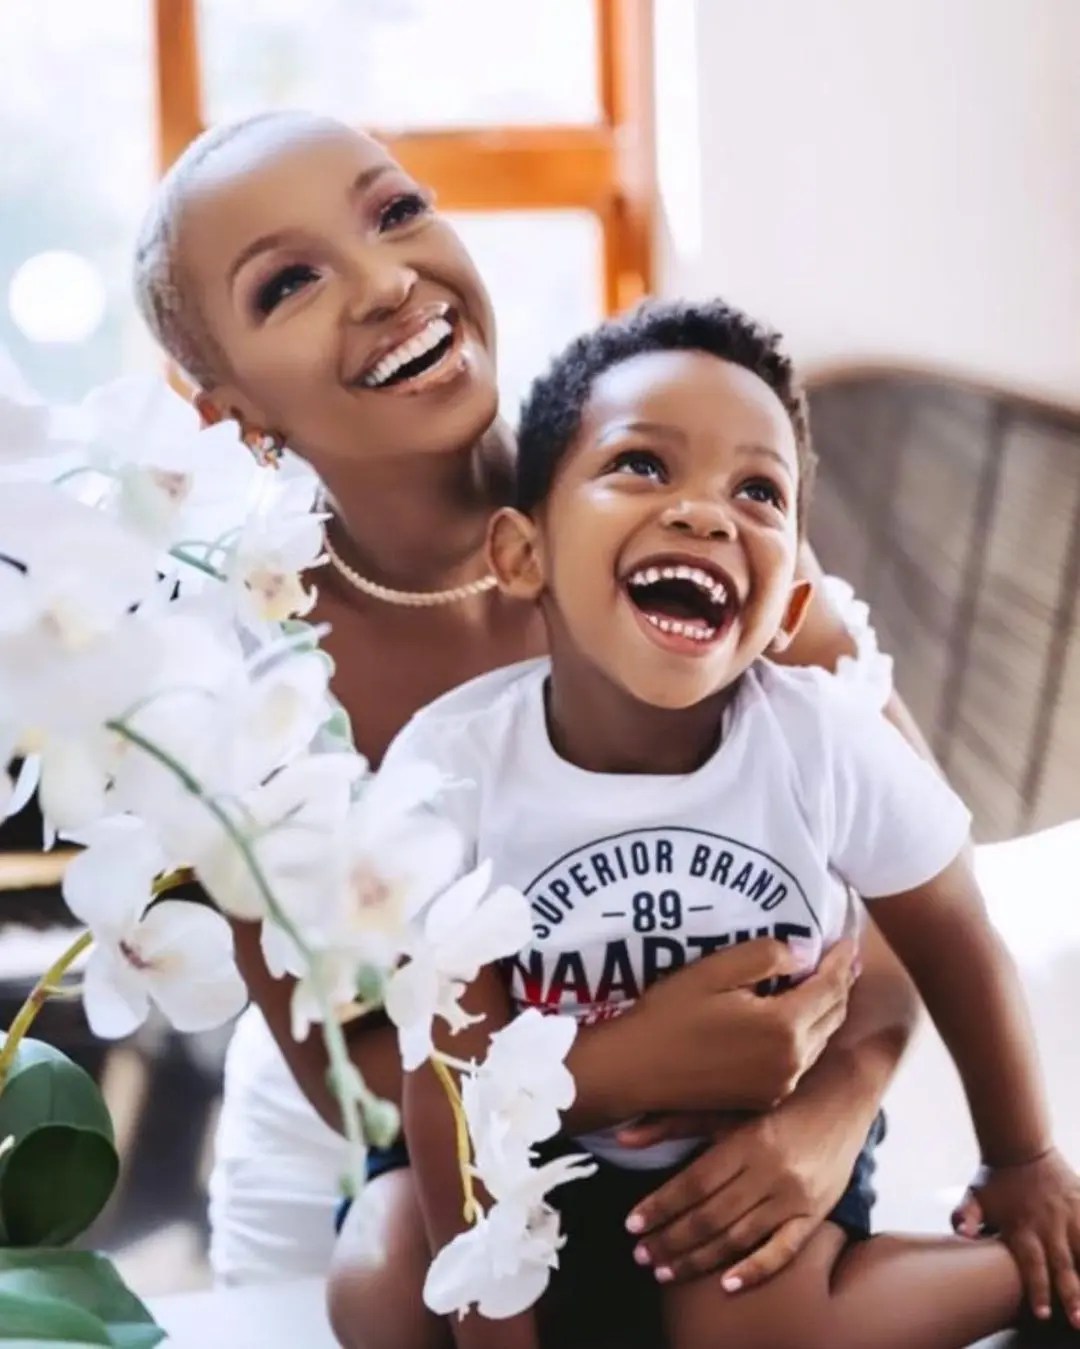 Nandi Madida’s son Shaka auditions to sing Osama with his dad on stage – Video